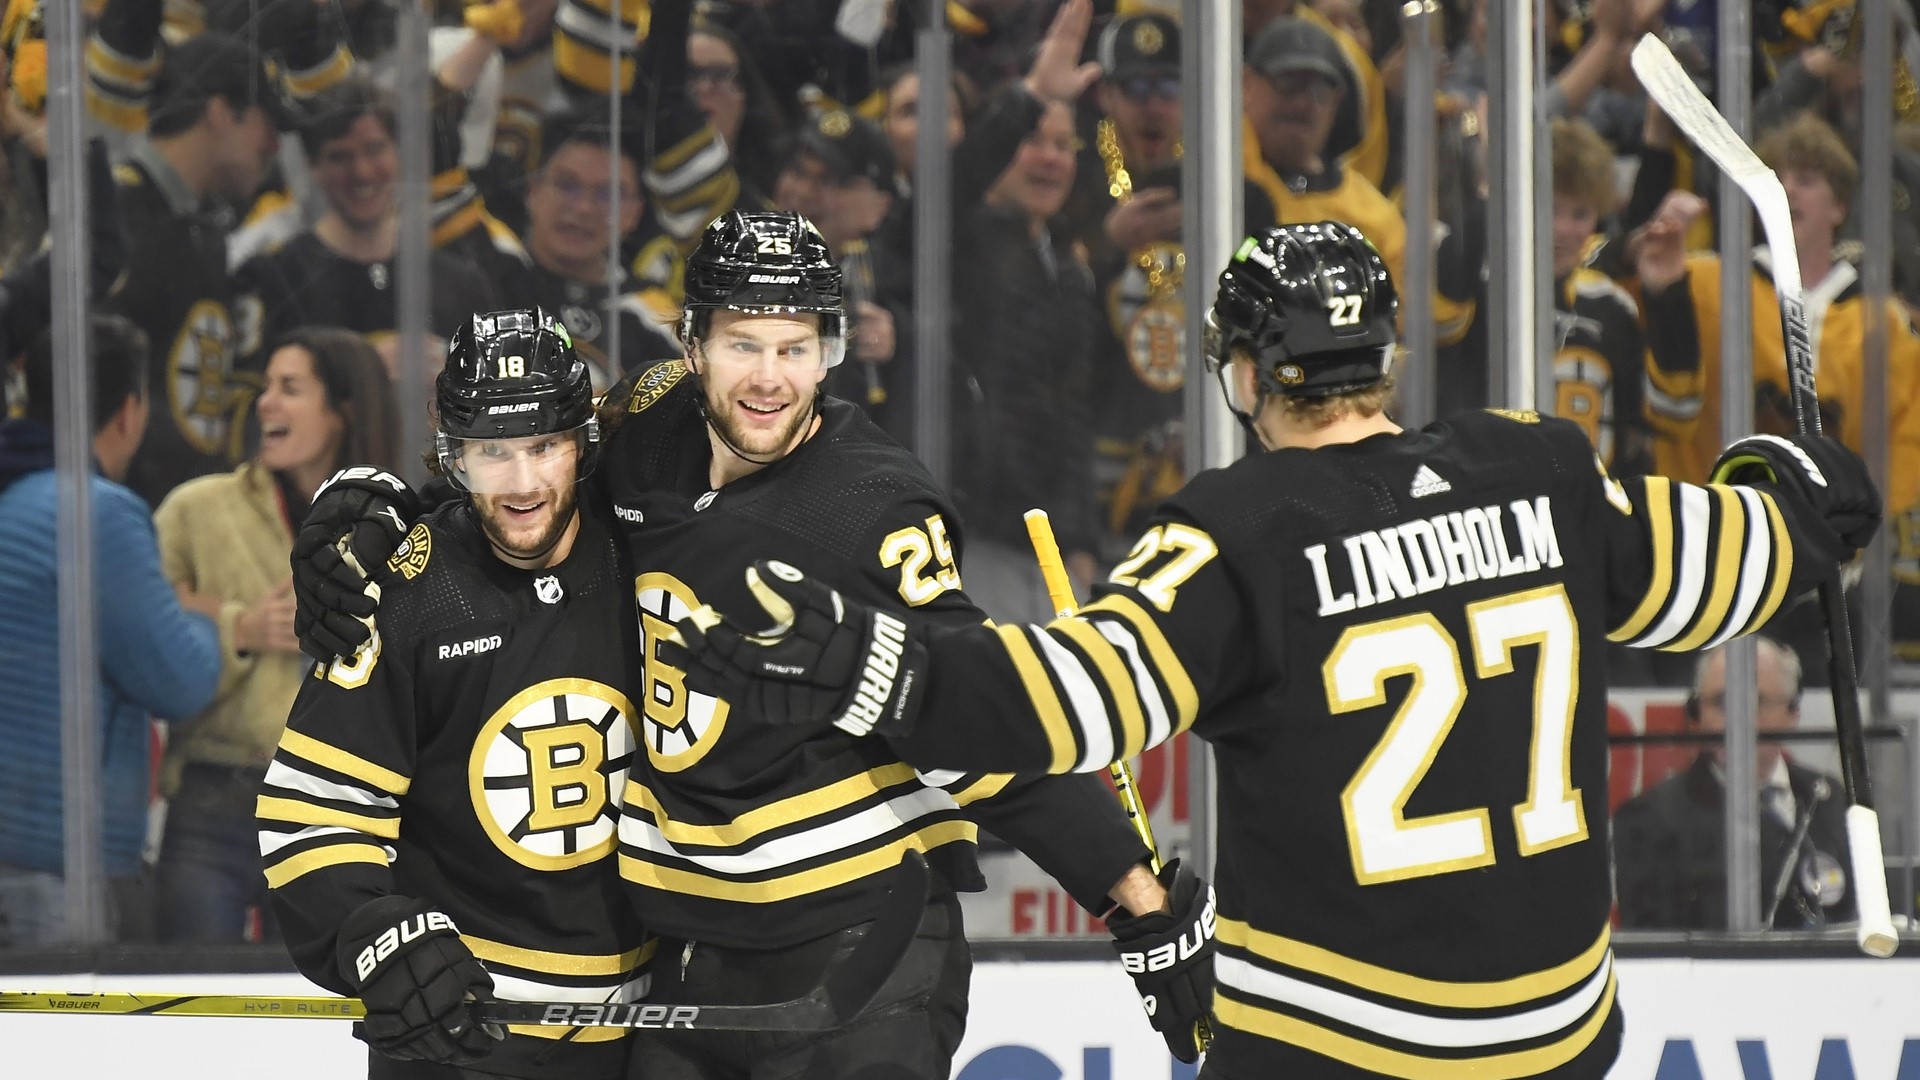 What Bruins Need To Show In Must-Win Game 5 Against Panthers